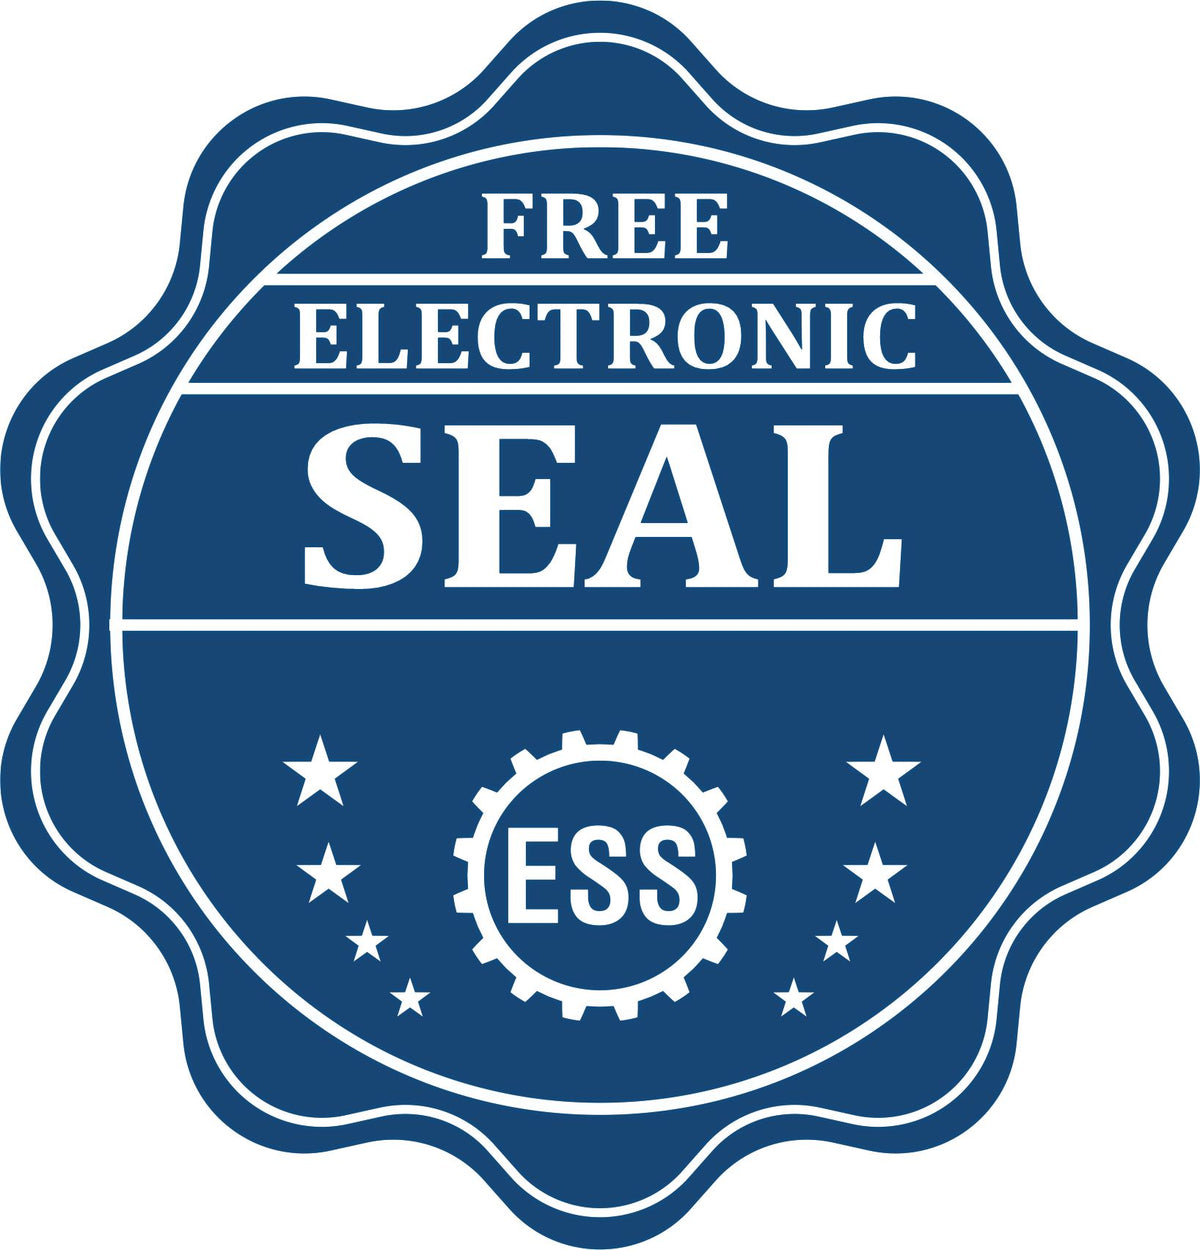 A badge showing a free electronic seal for the Handheld Colorado Professional Geologist Embosser with stars and the ESS gear on the emblem.